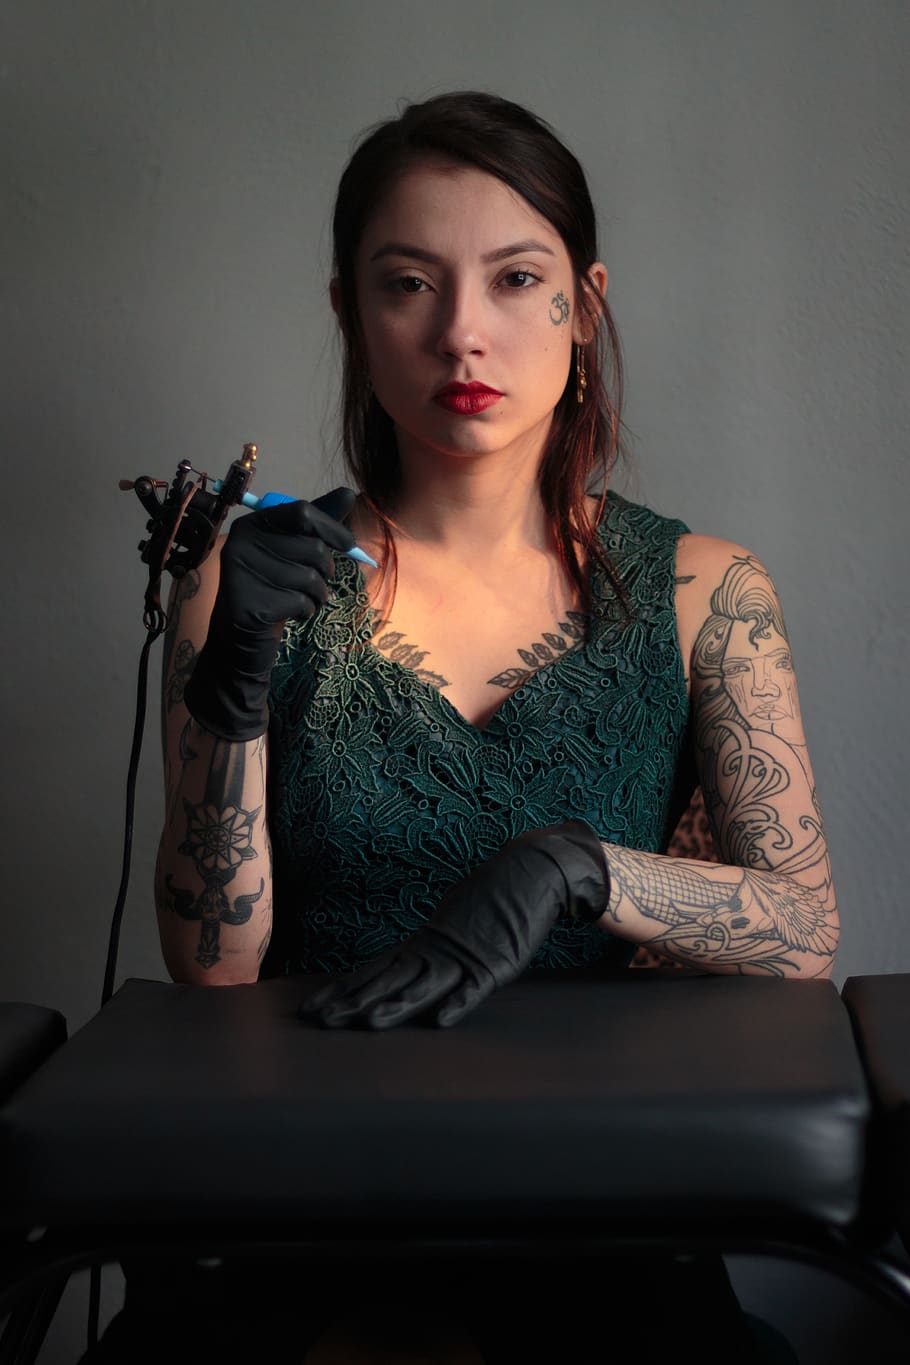 woman sitting and holding tattoo machine, front view, one person